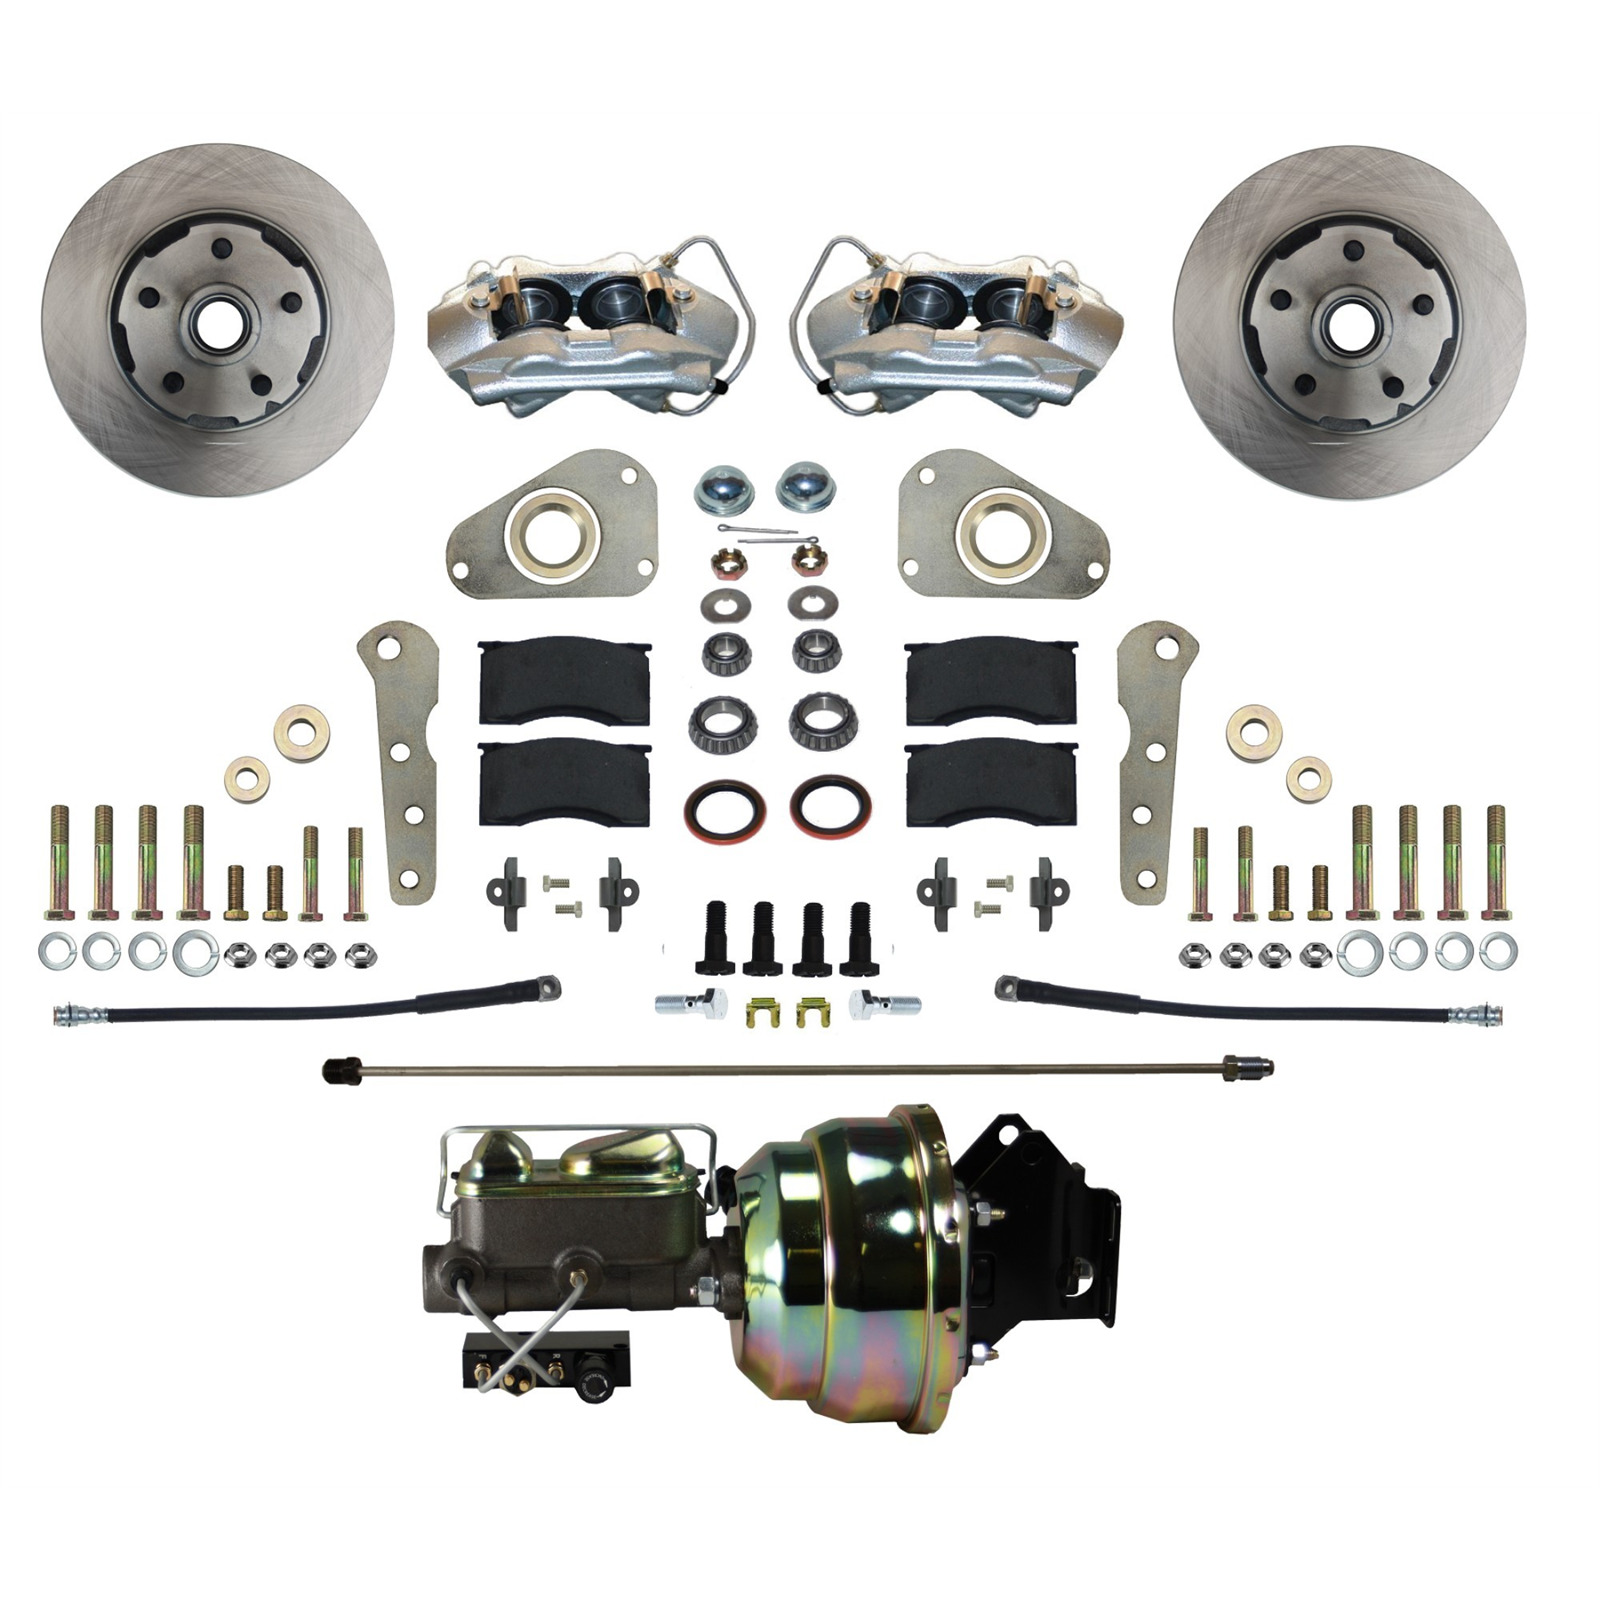 Ford Galaxie Power Front Disc Brake Conversion Kit for Factory Y Block Motors